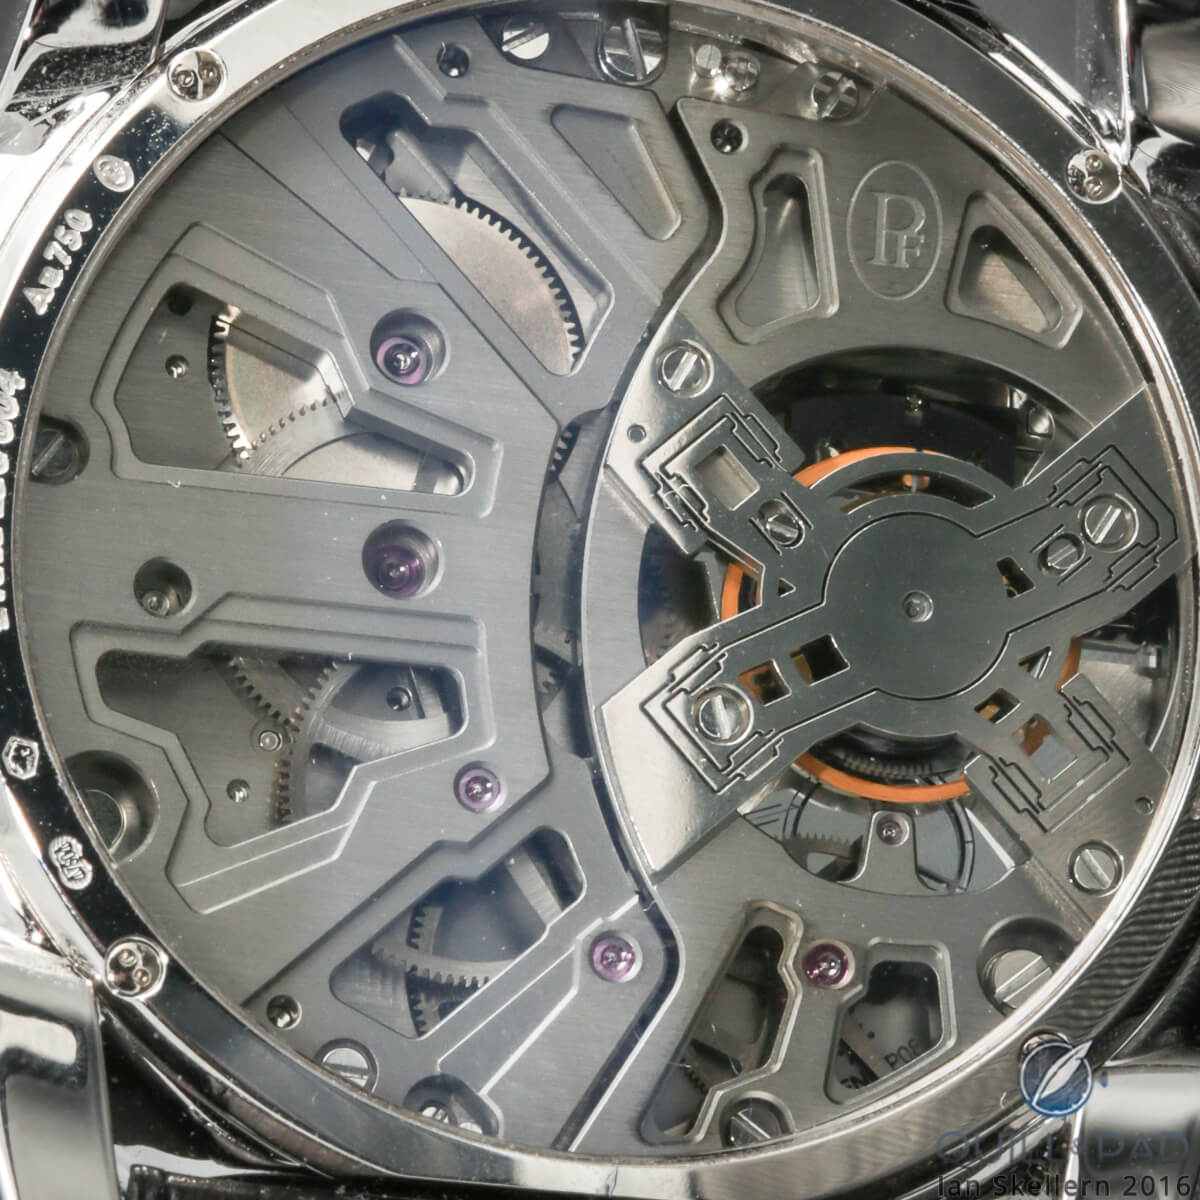 View through the display back of the Parmigiani Senfine concept watch